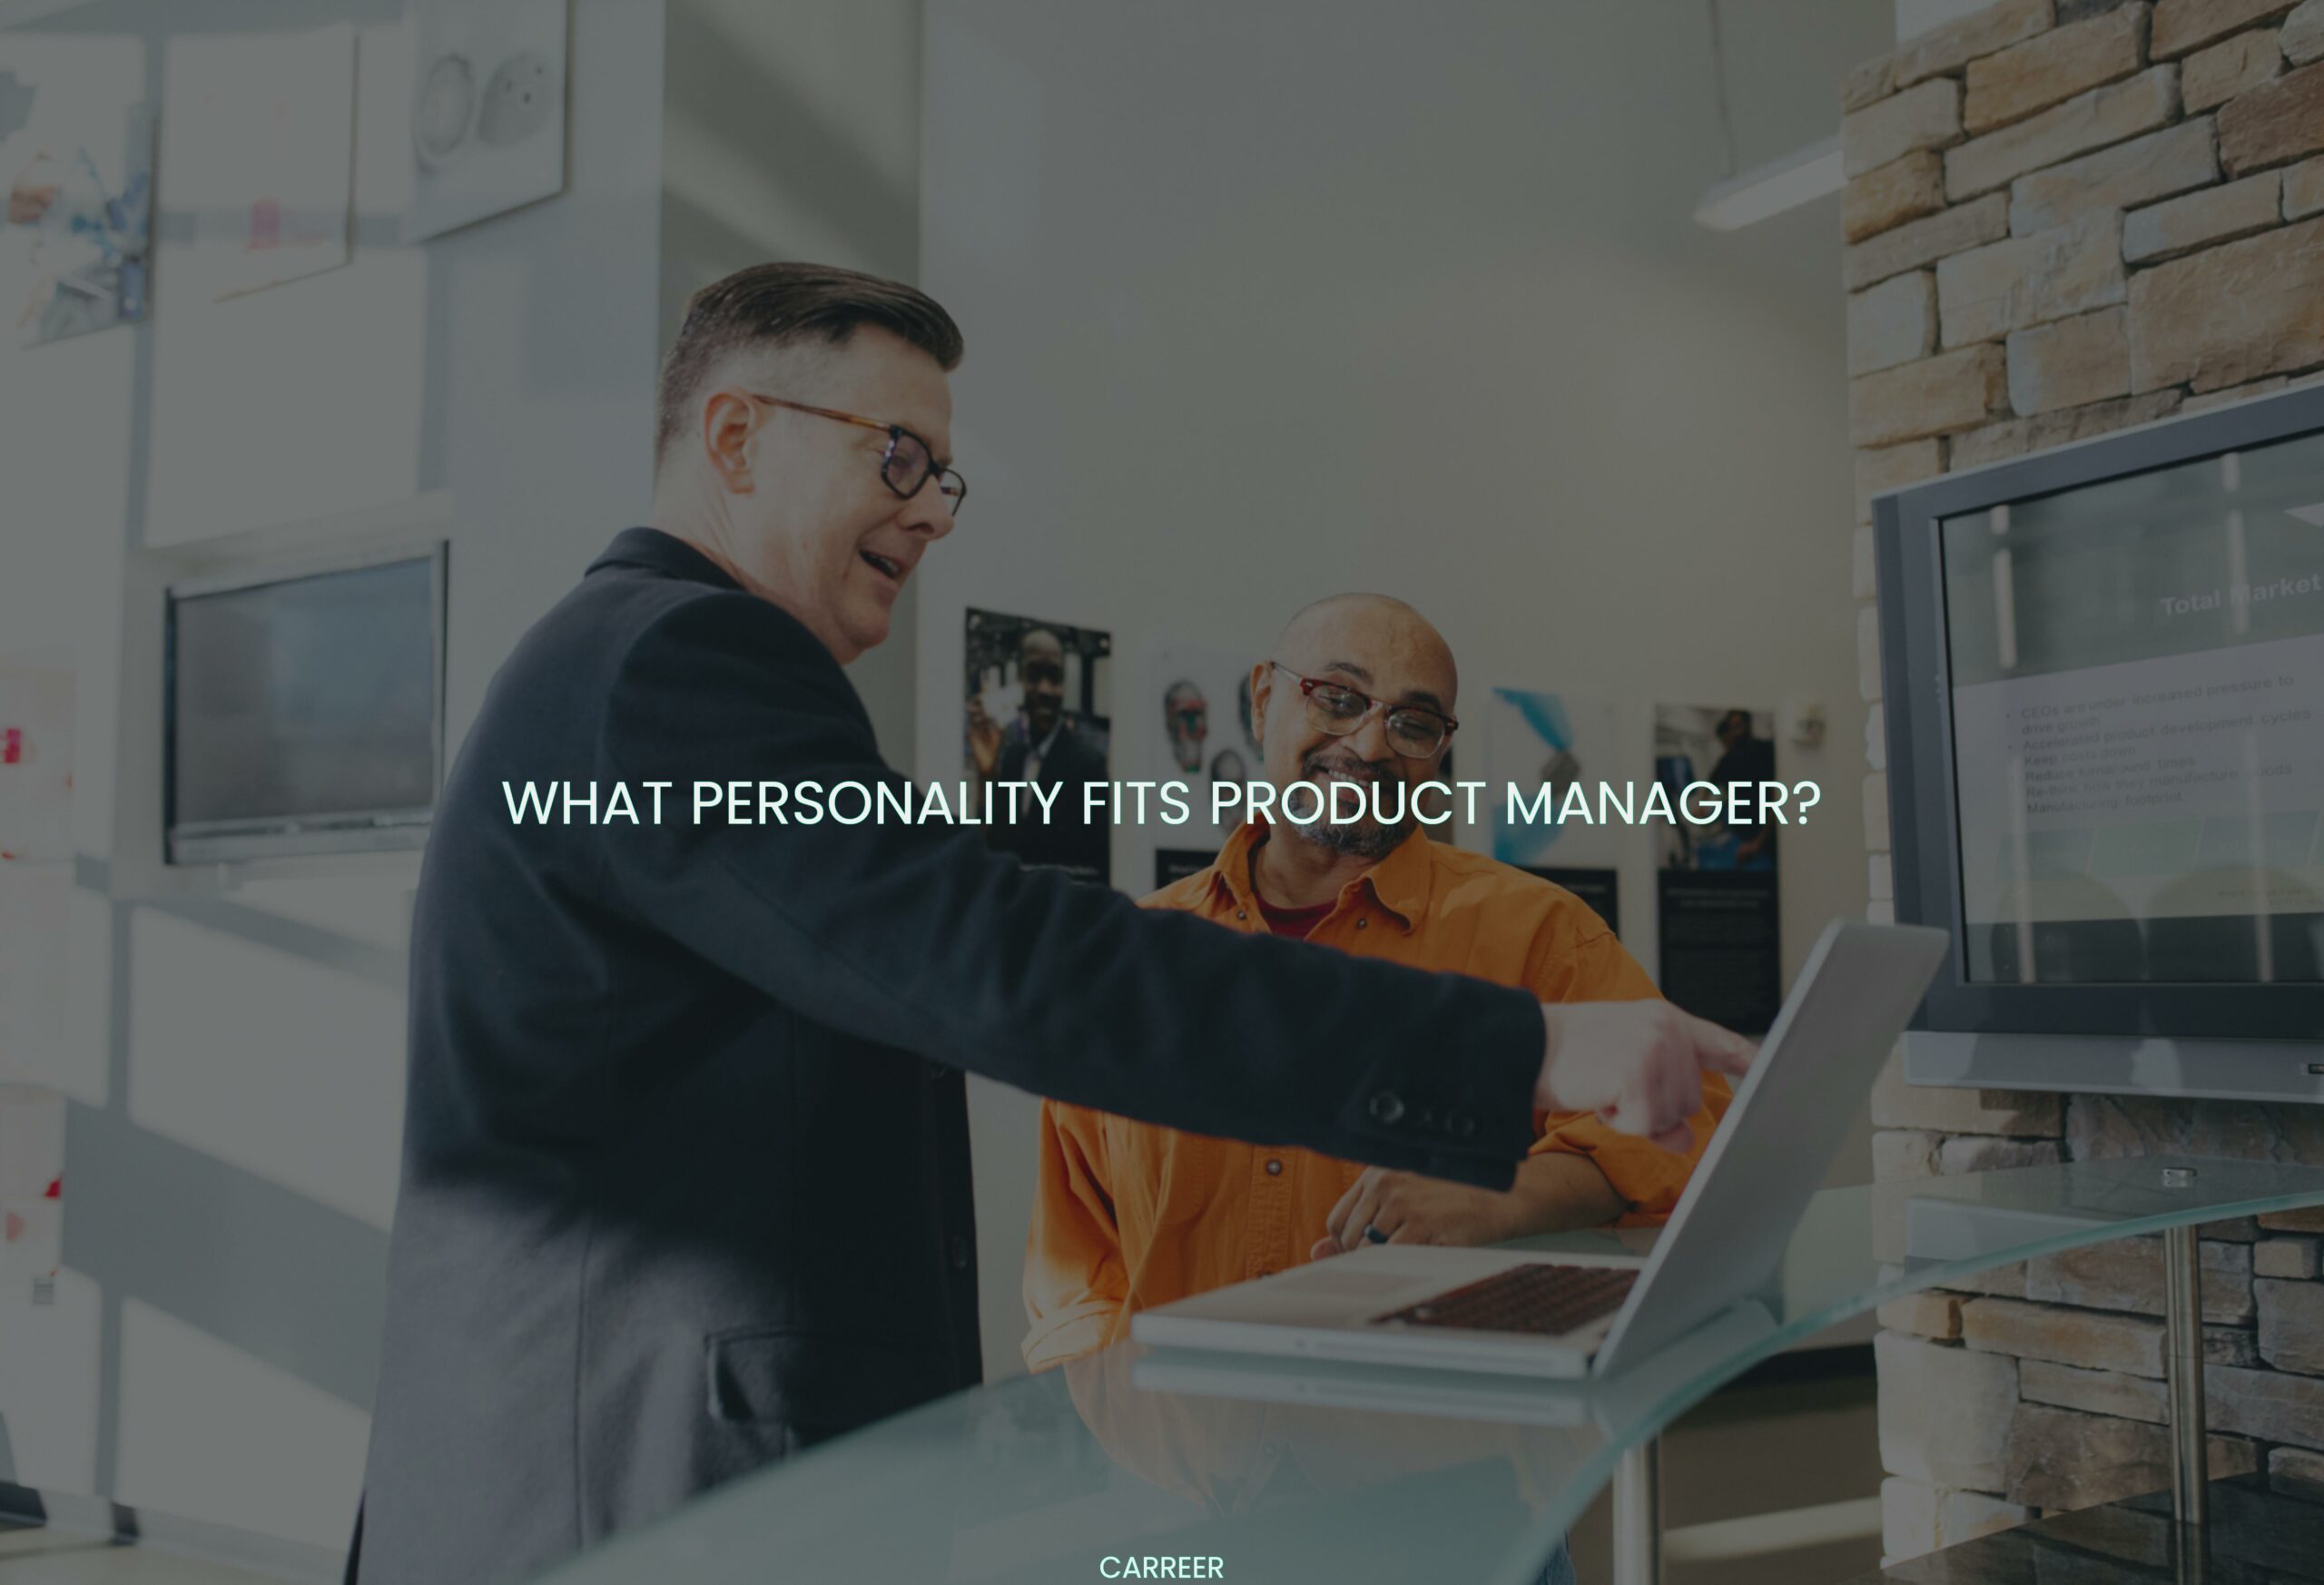 What personality fits product manager?